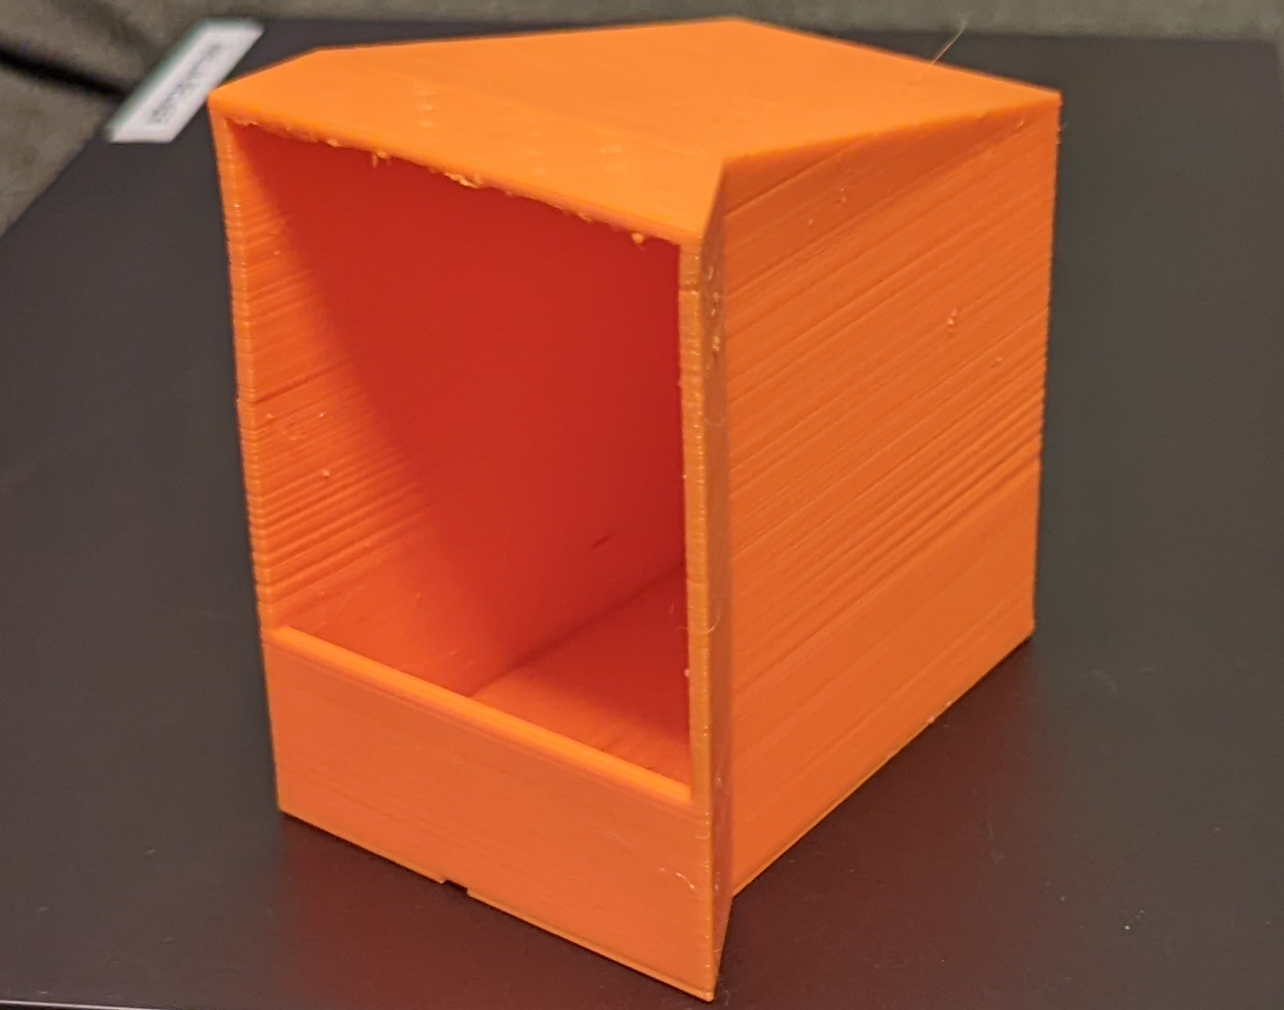 Ford Maverick Cubby FITS Slot + Some other 3D print designs wtqvCa3